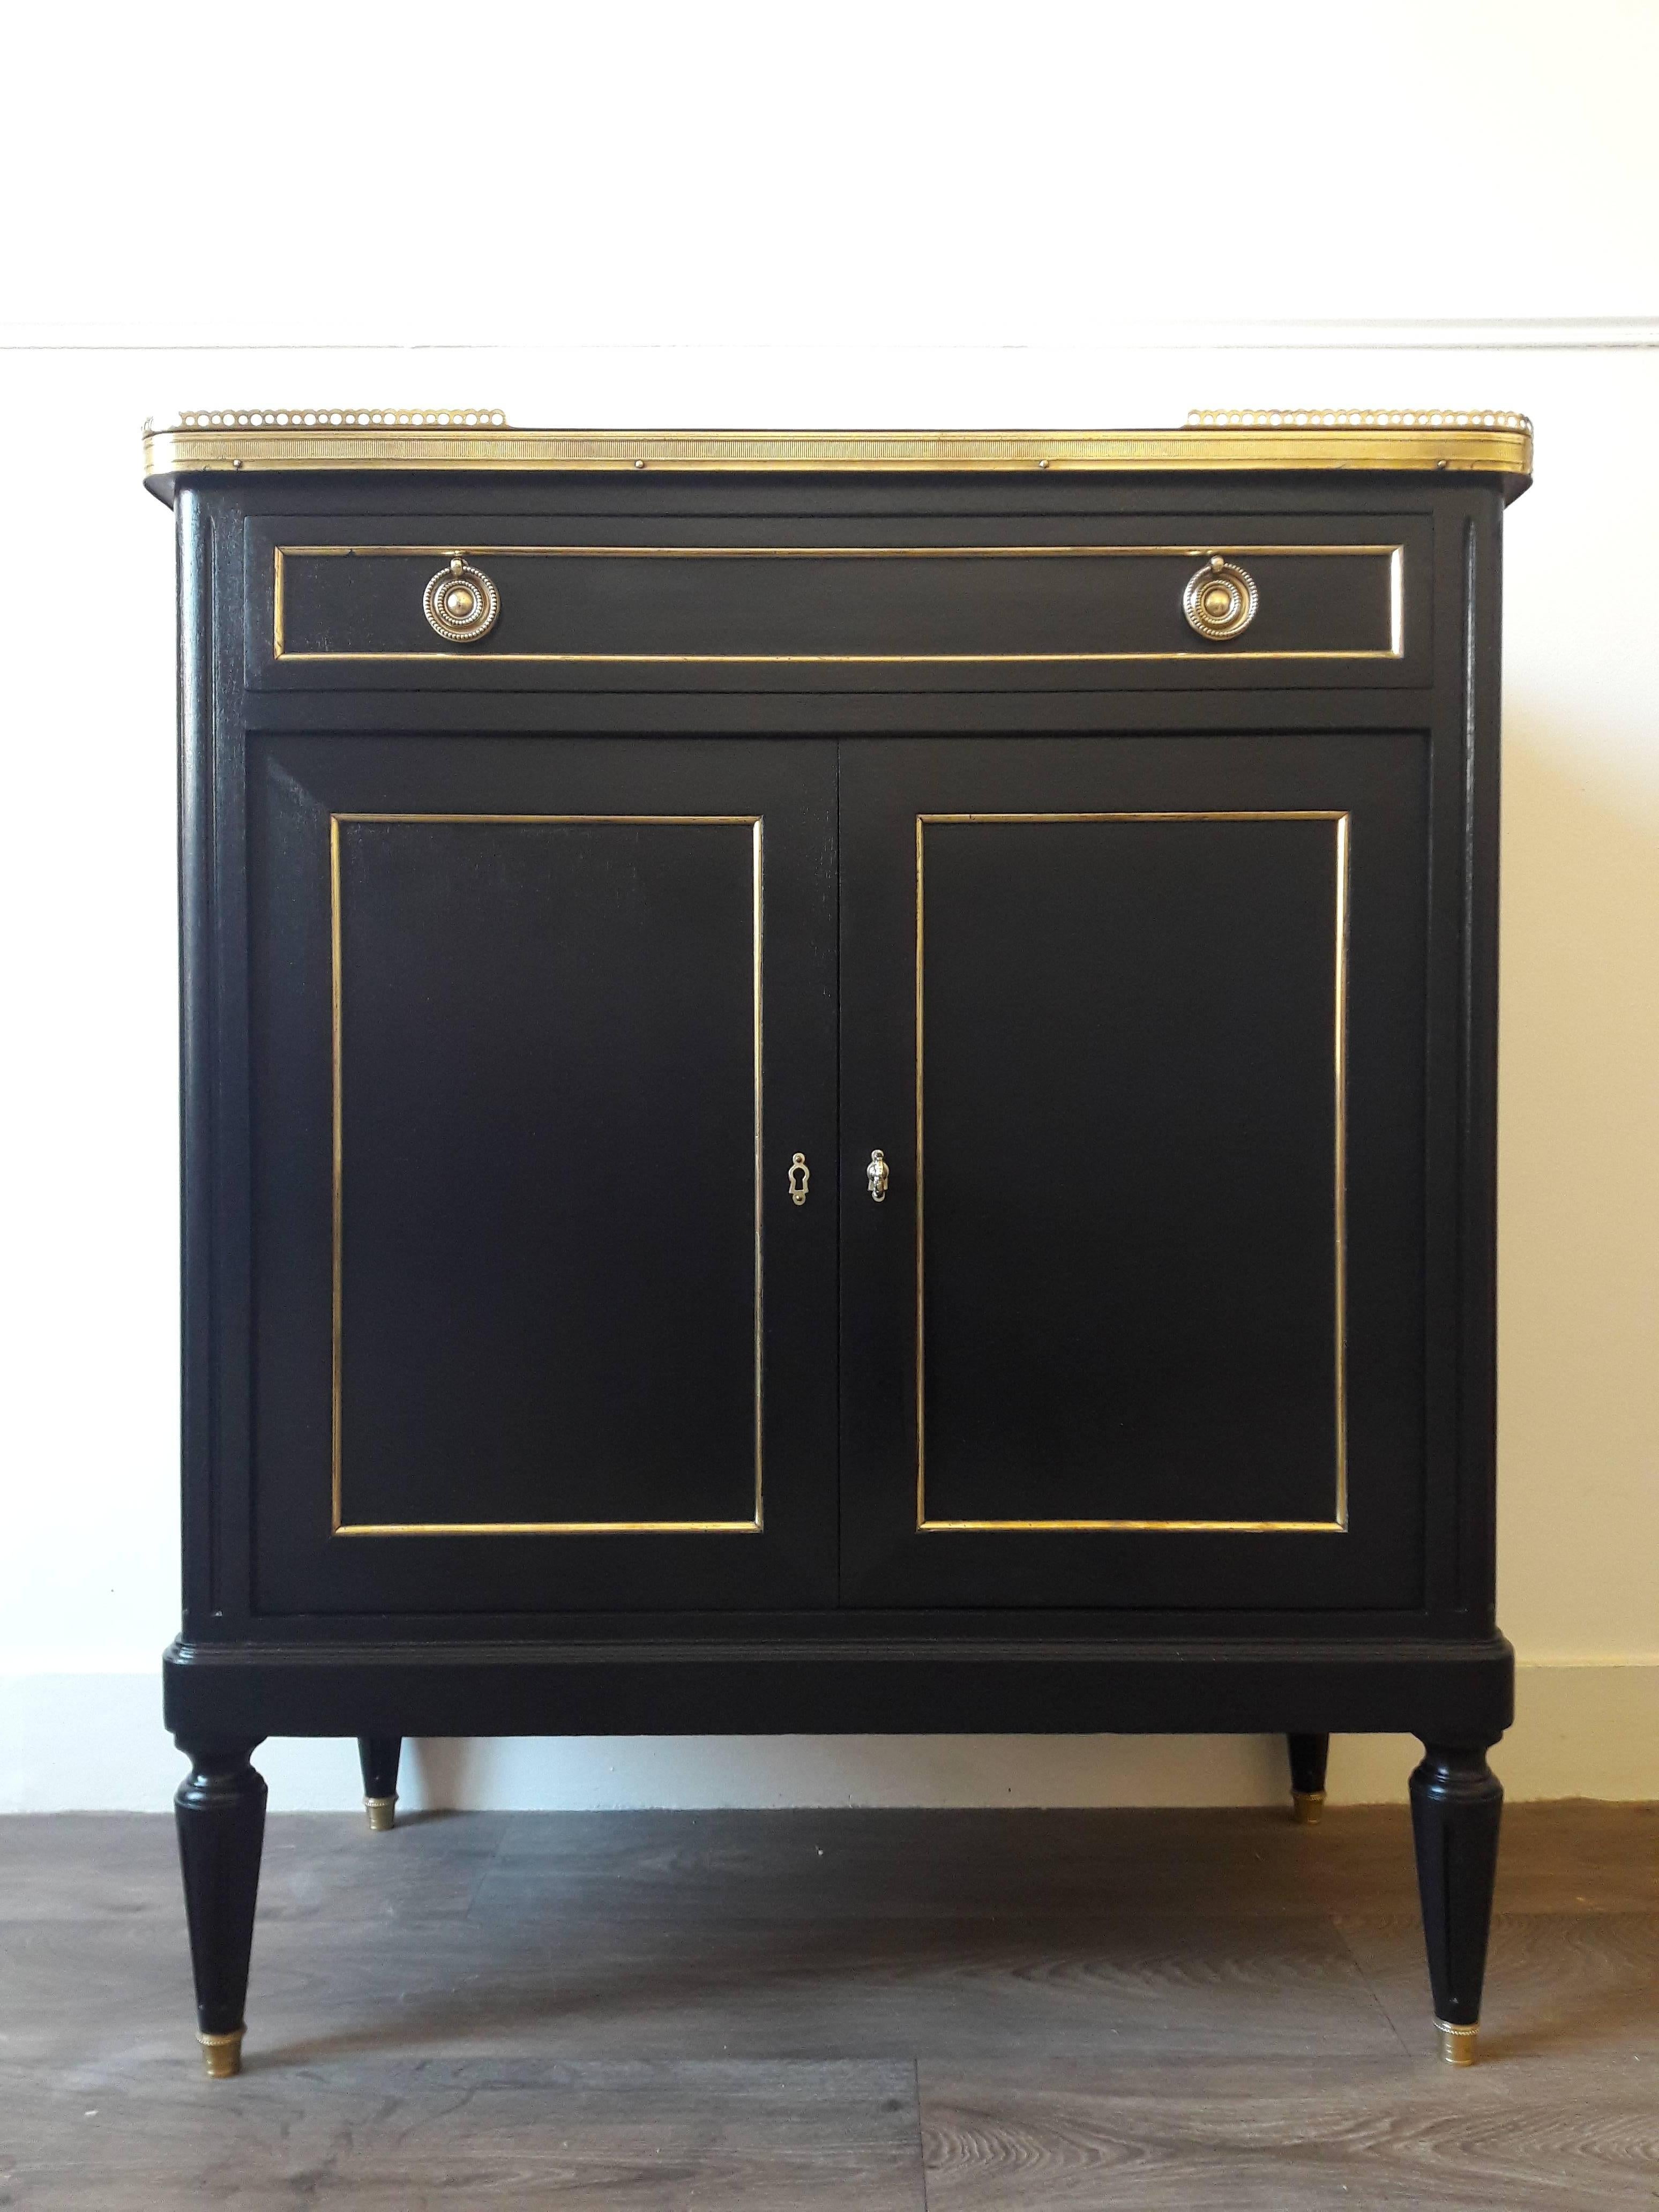 Antique French Louis XVI style bar buffet and topped with a white Carrara marble, fluted legs finished with golden bronze clogs.
One drawer, two doors and the key.
Perfect to create a small whiskey bar in the living room.